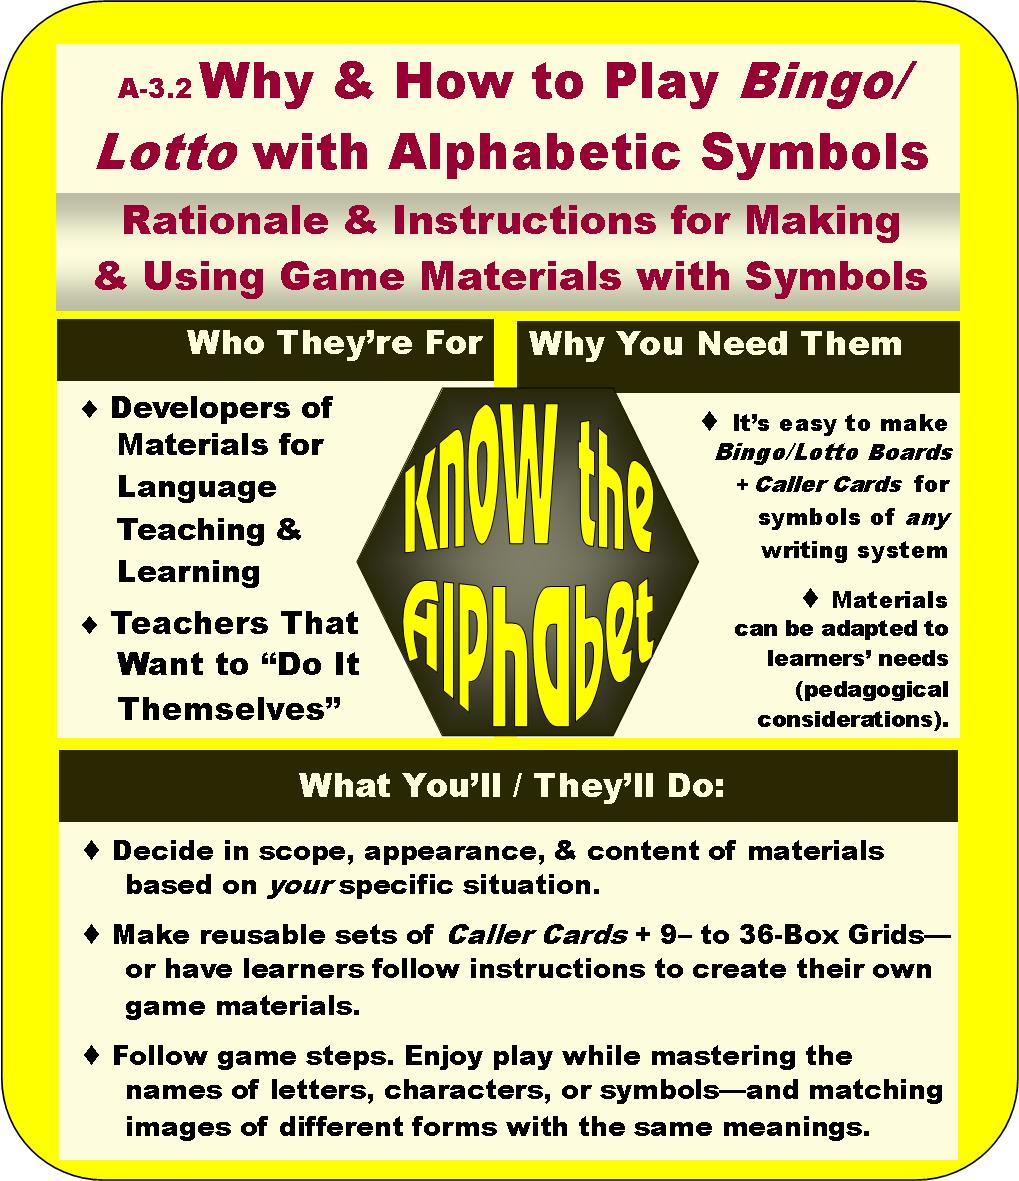 A-03.02: Learn Why & How to Play Bingo & Lotto with Alphabetic Symbols